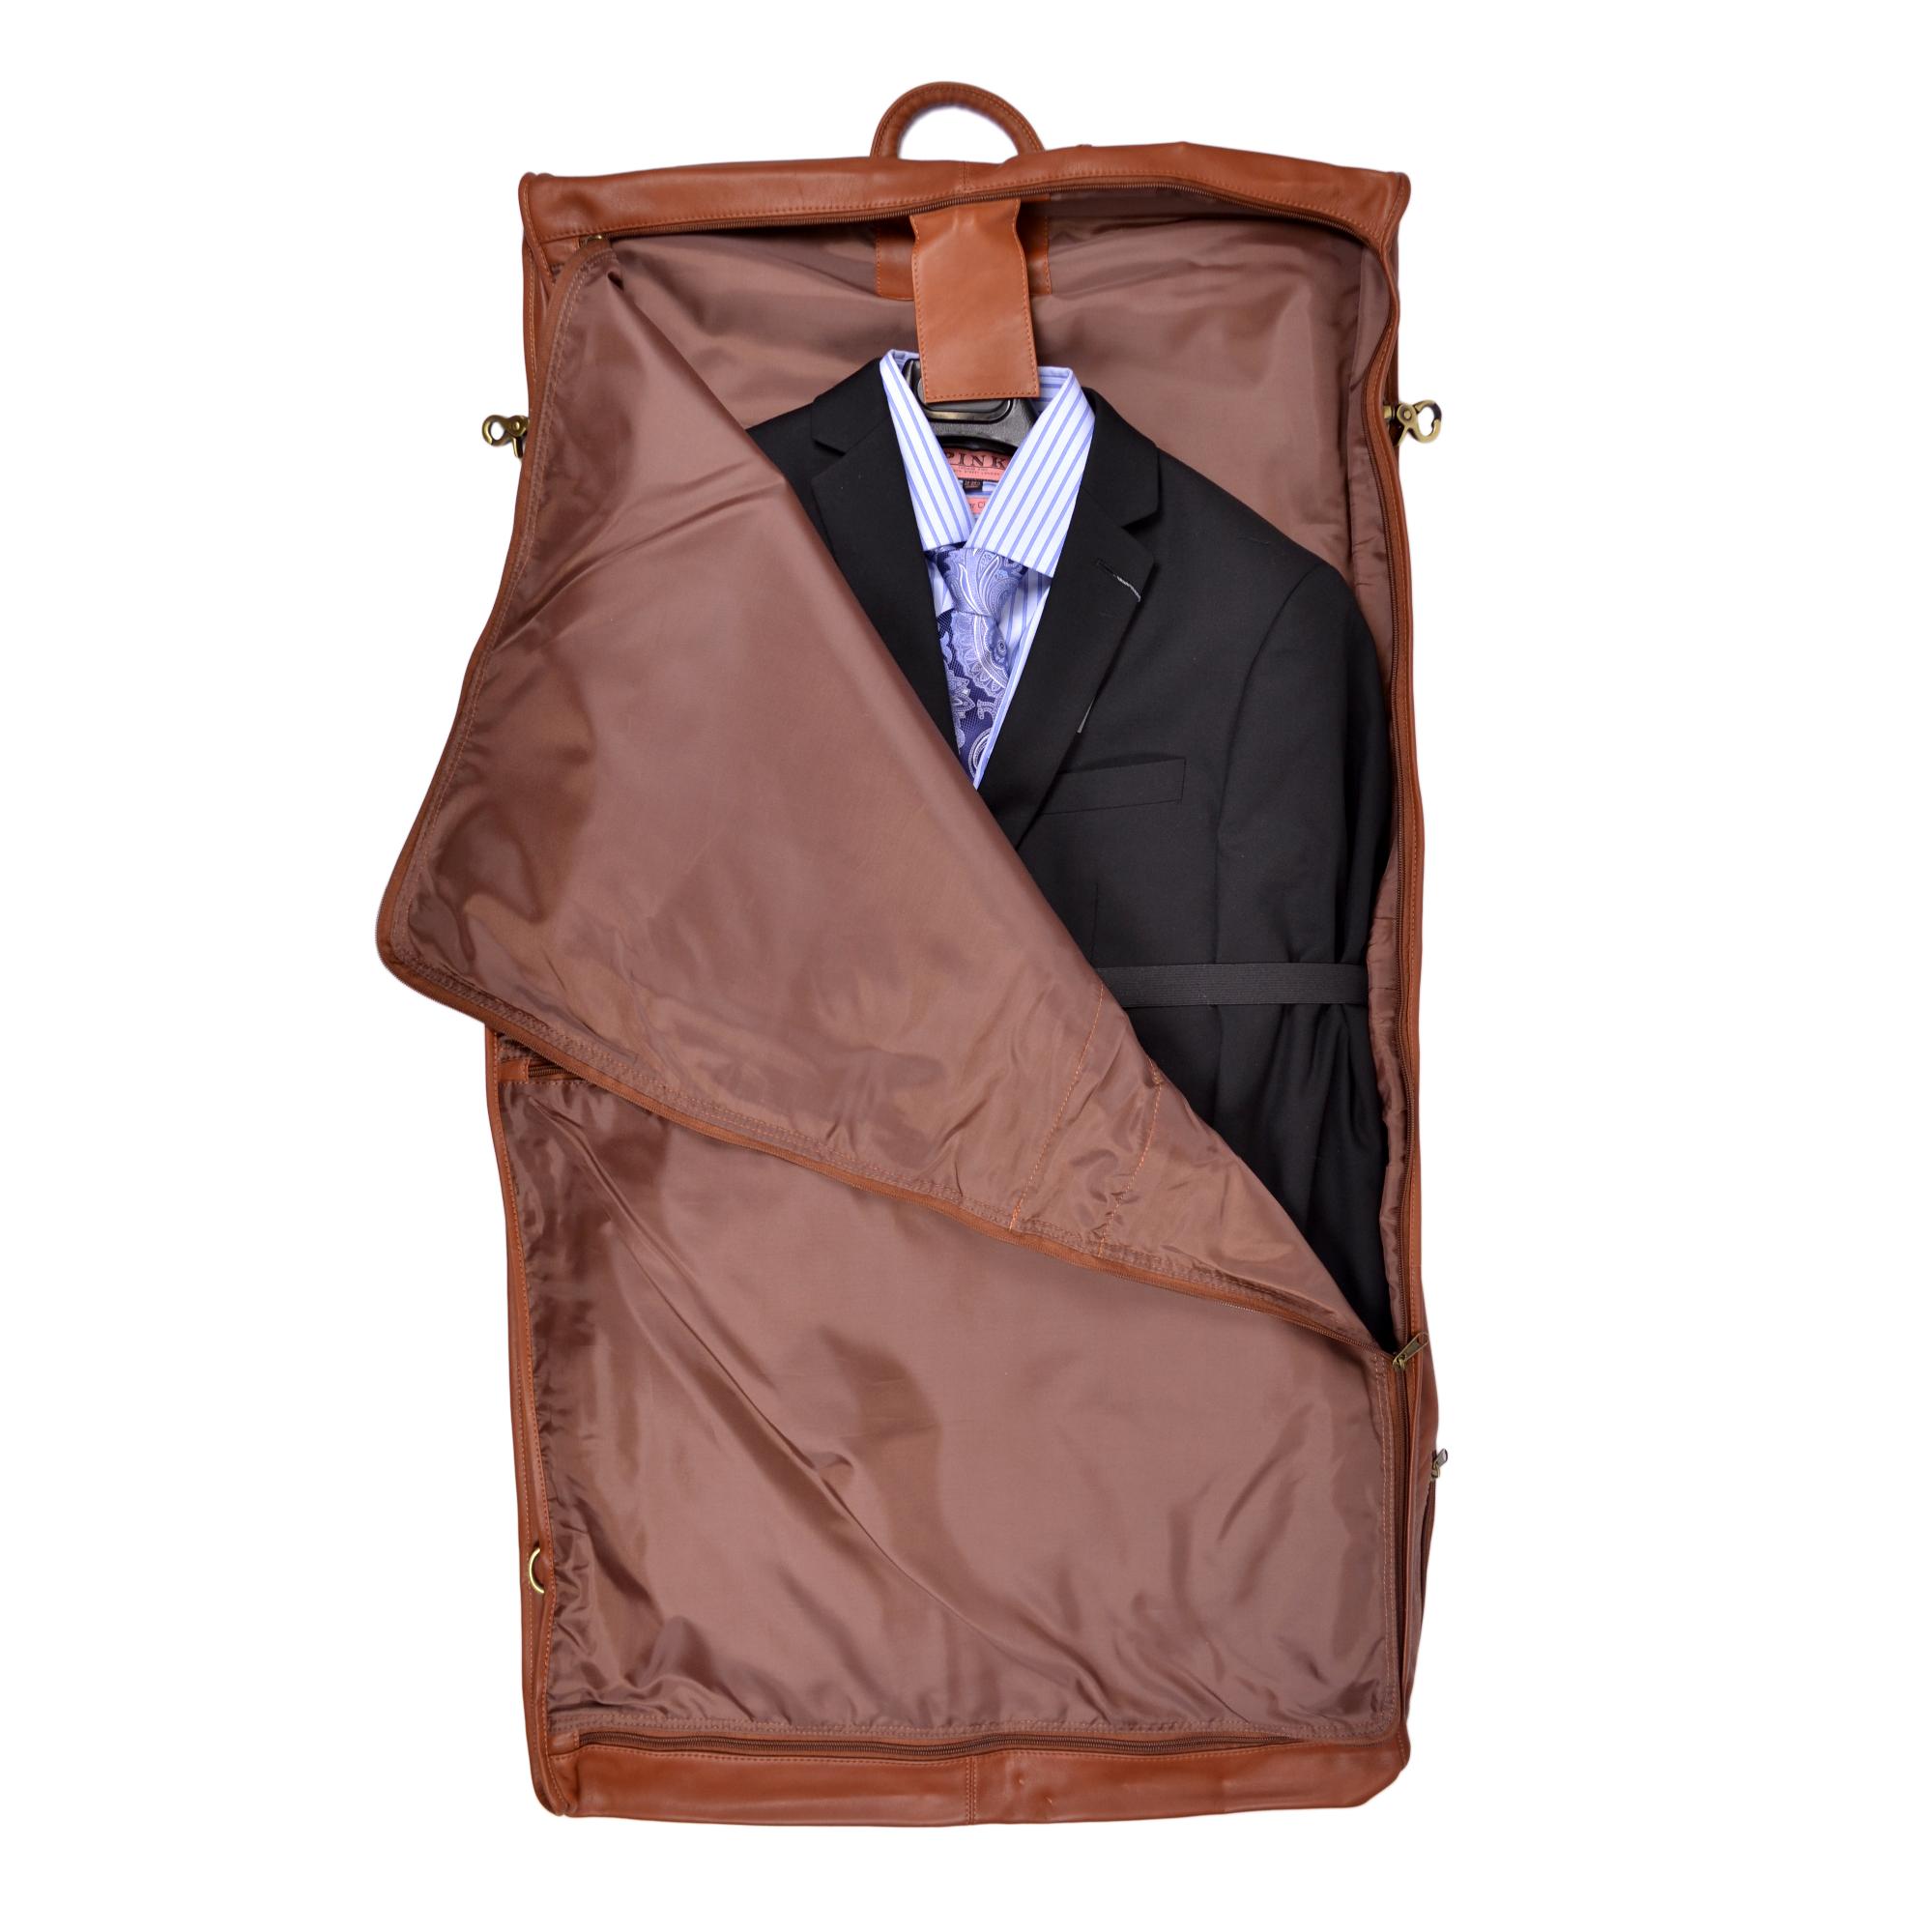 Royce Leather Carry on All Leather Suiter